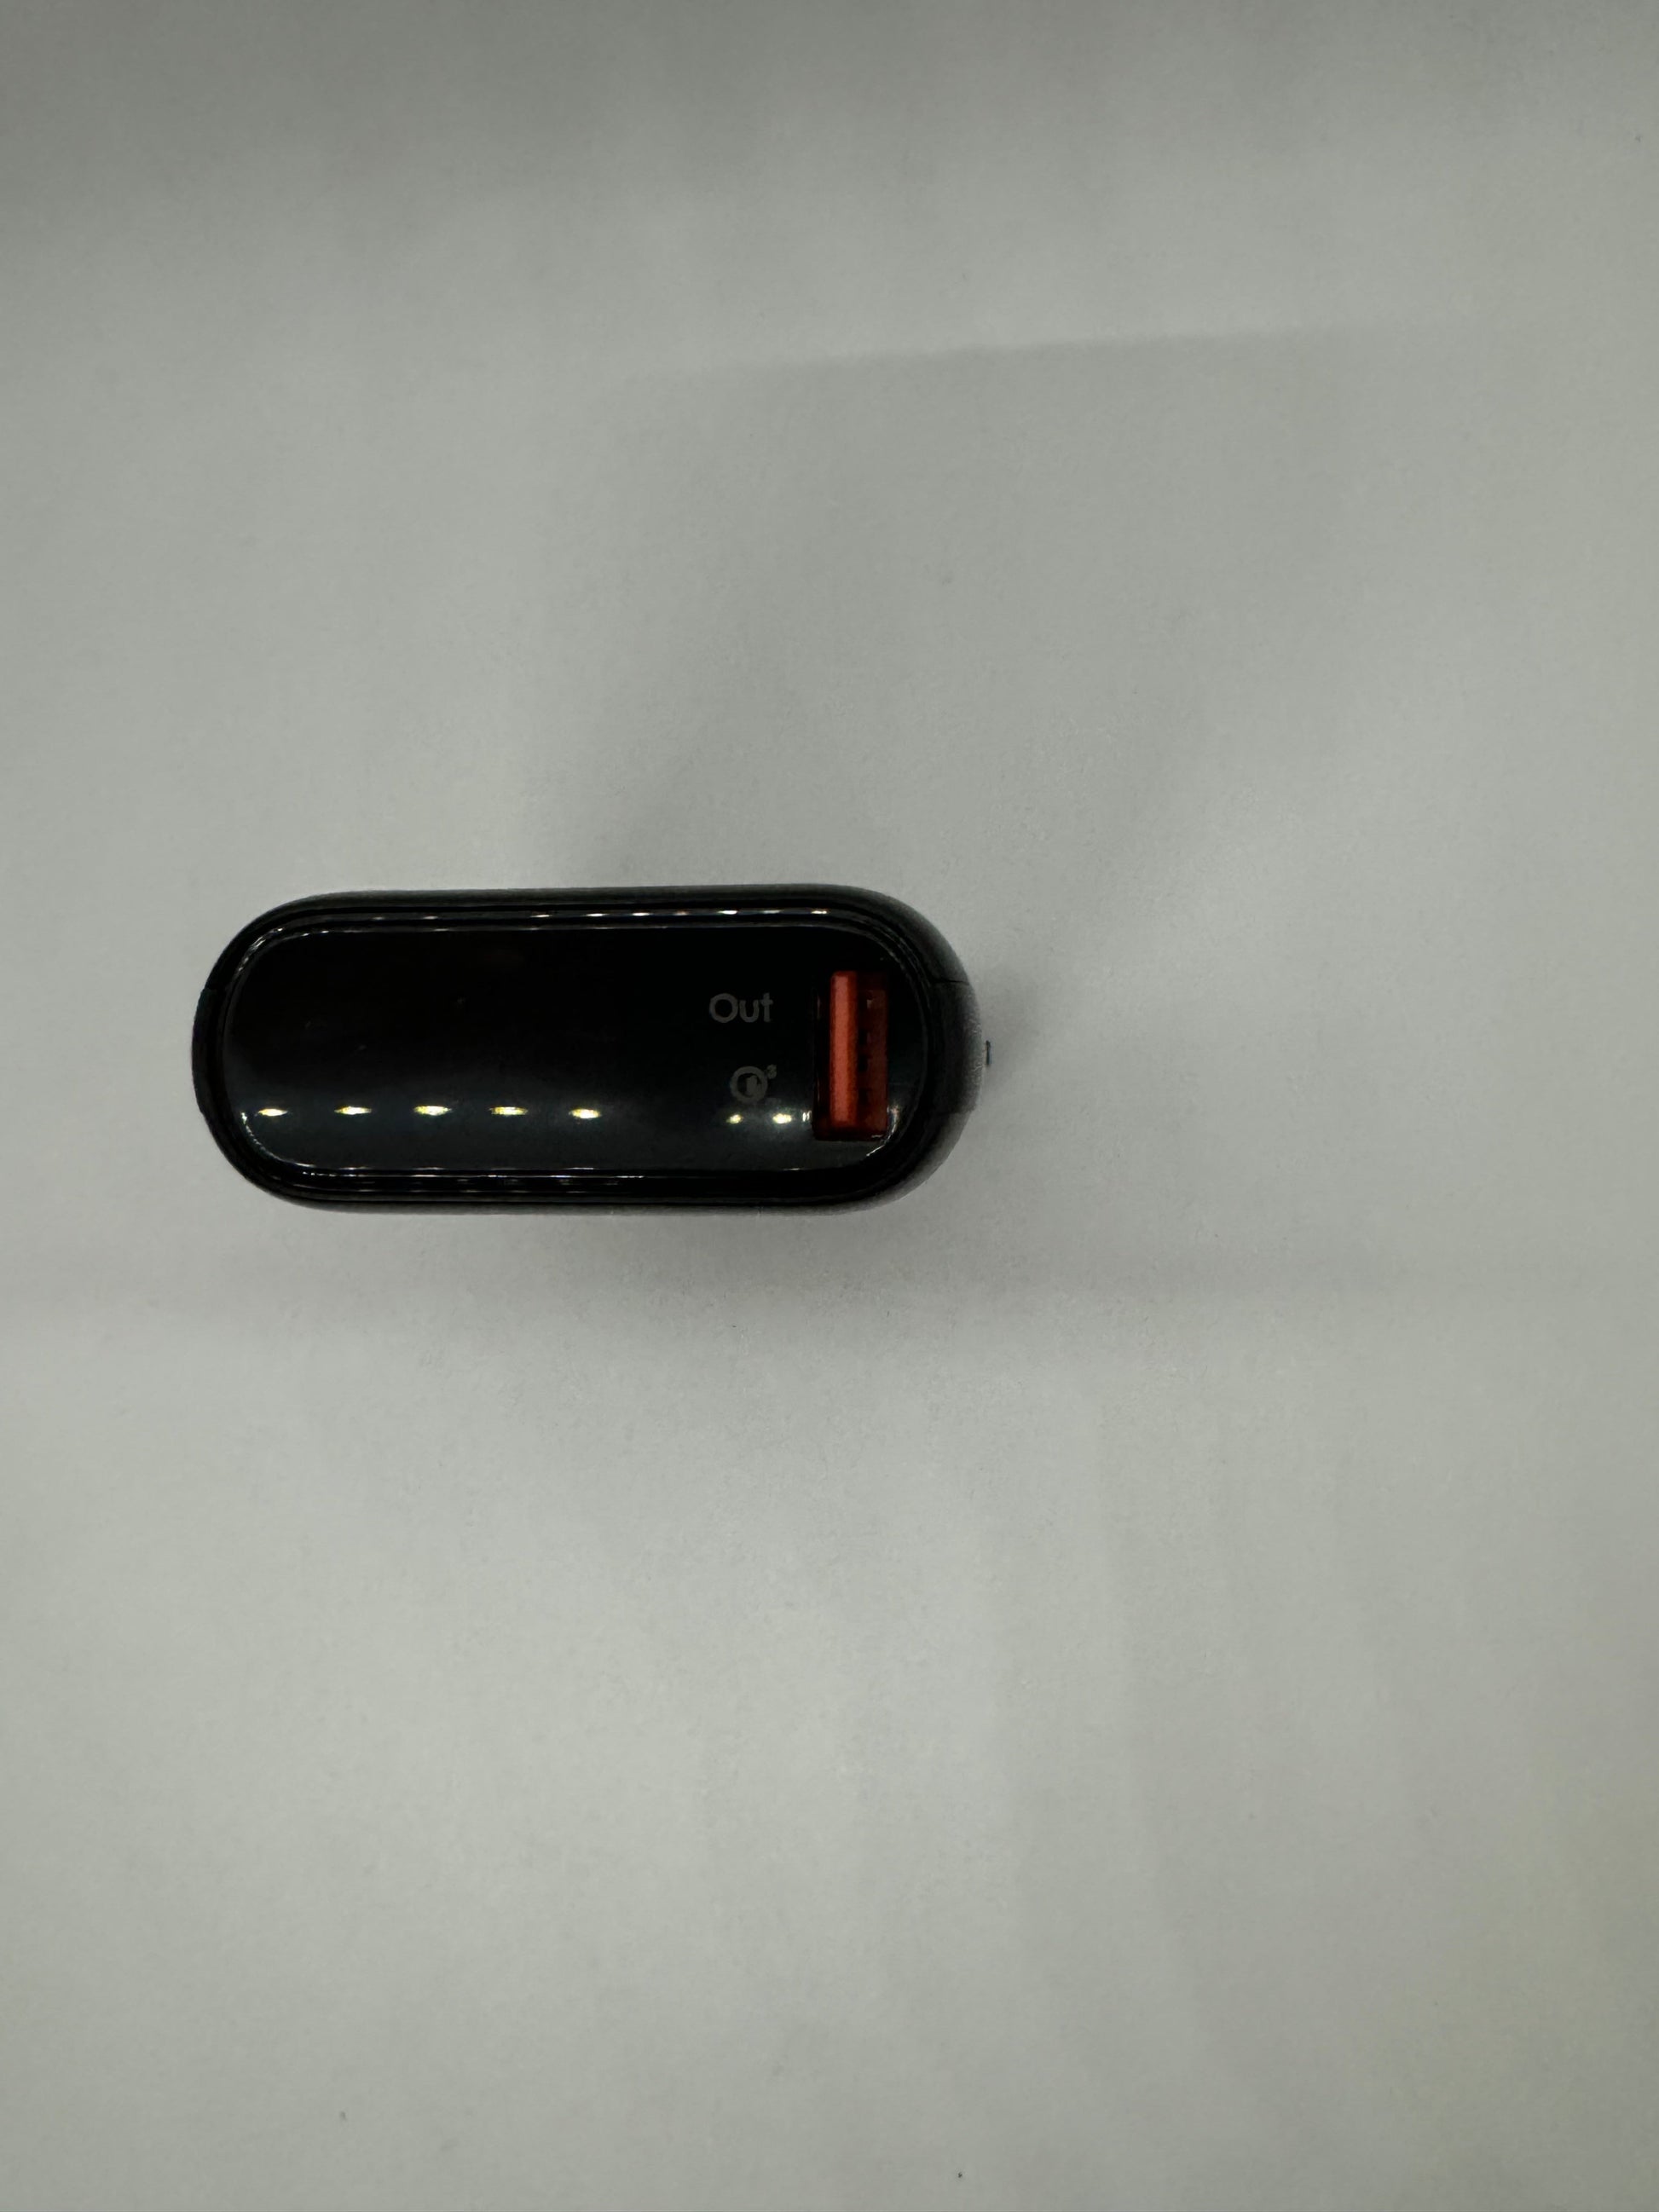 Be My AI: The picture shows a small, black, rectangular device placed on a white surface. The device appears to be a power bank or some sort of electronic gadget. It has a glossy finish and is slightly curved at the edges. On the top side, there are two ports. One of them has an orange interior and is labeled "Out". There are also four small white dots in a row, possibly indicating battery level or status lights.